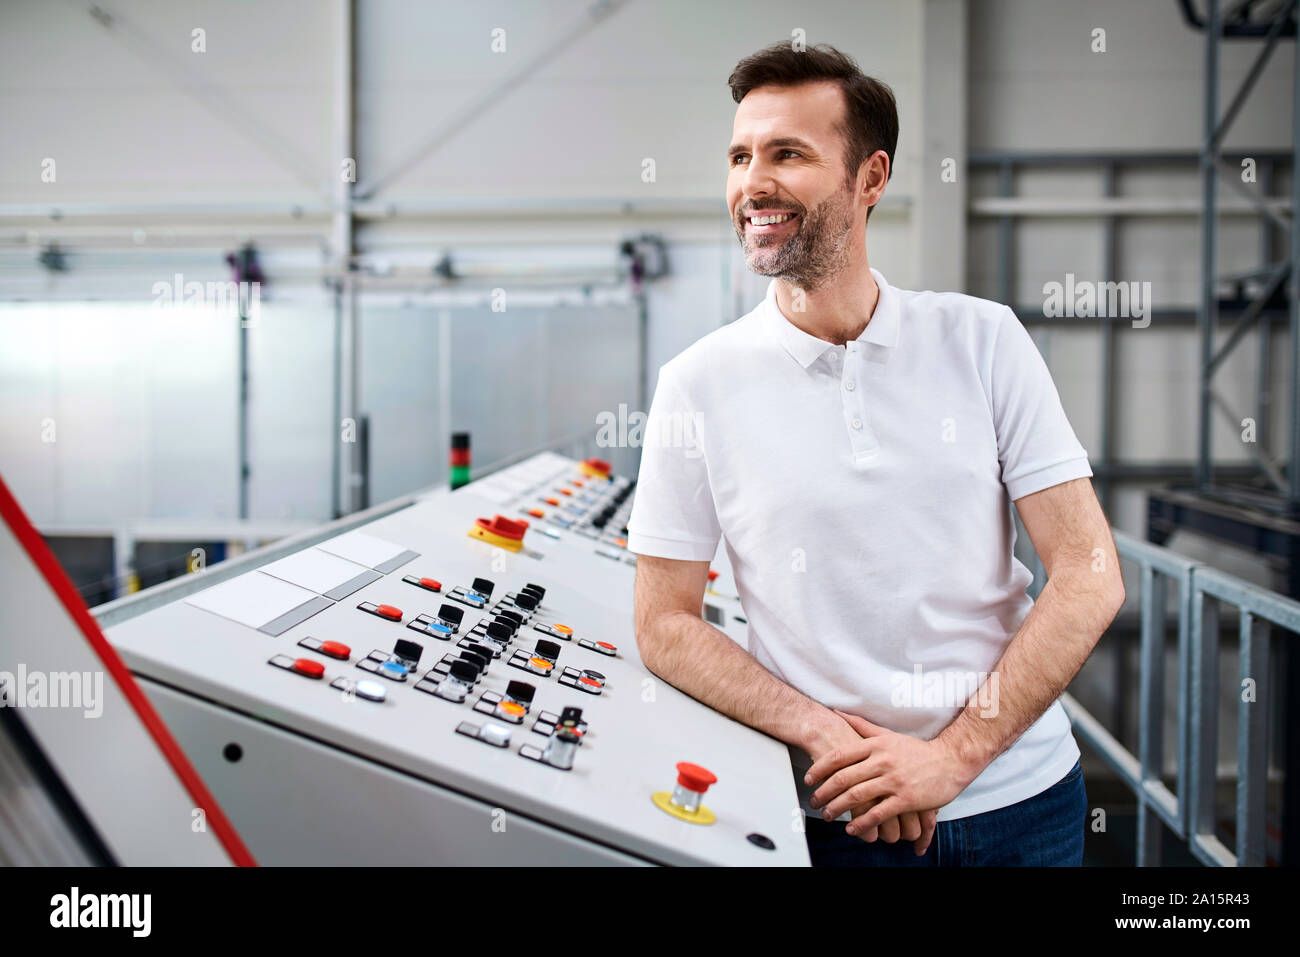 Smiling man standing at control panel in a factory Stock Photo